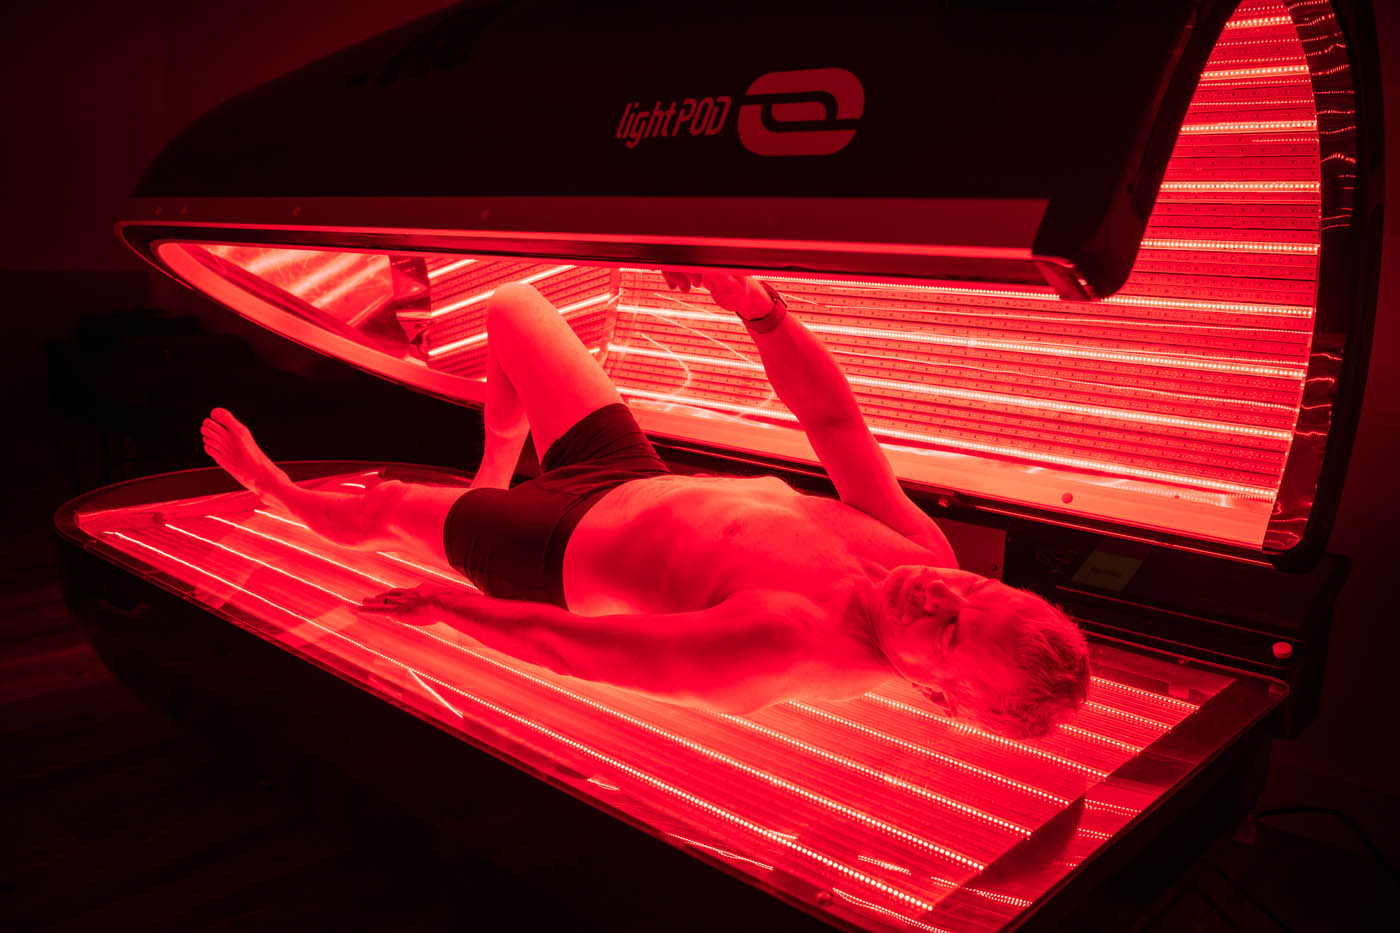 A man getting into a dark pod with bright red light, contact Light Lounge today for your infrared light therapy in Holland.